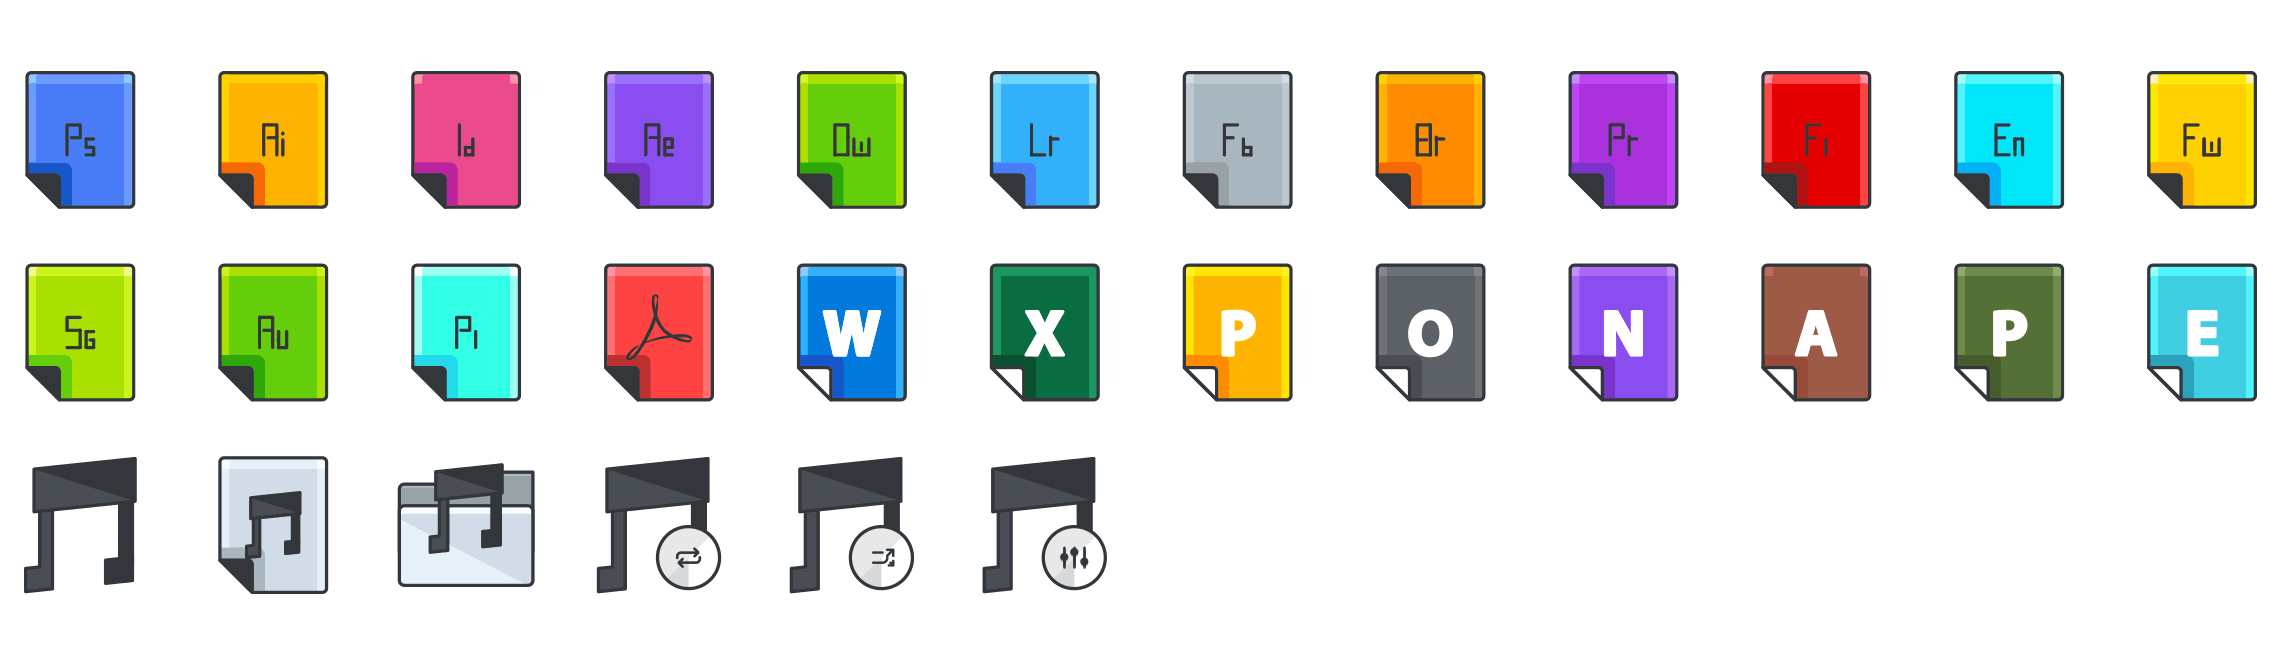 File-formats-filled-outline-icons